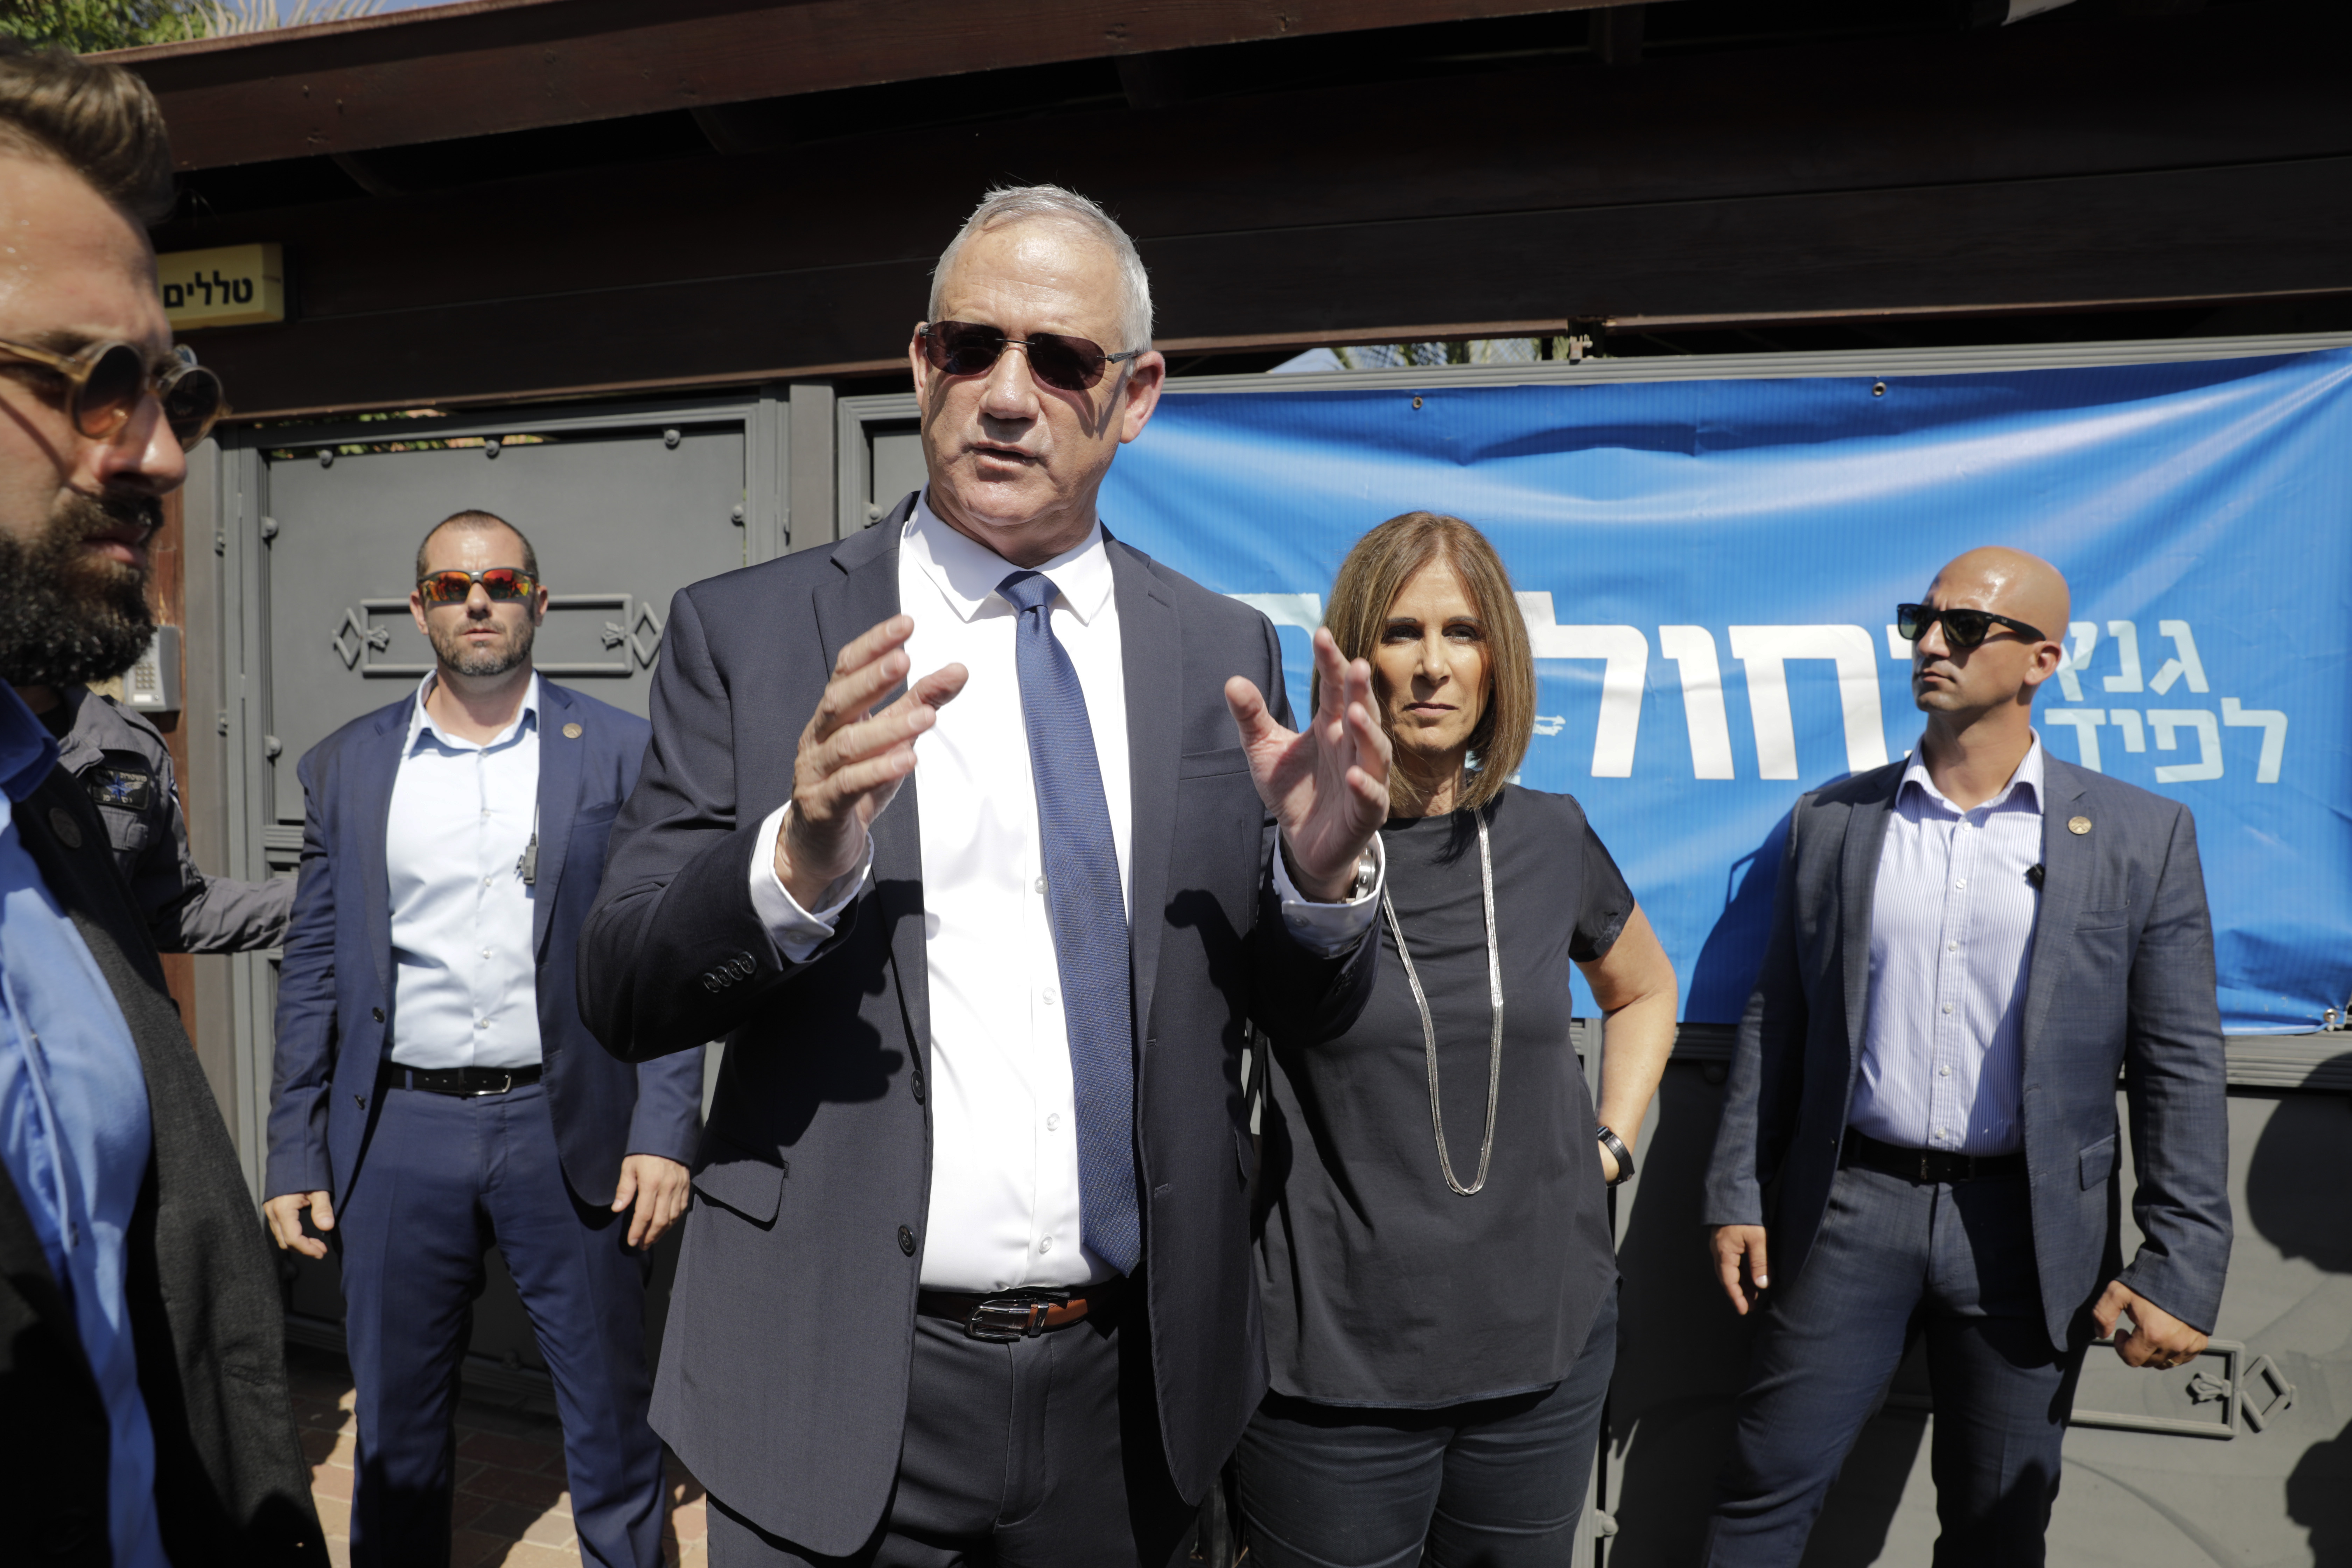 Blue and White party leader Benny Gantz speaks after he cats his ballot in Rosh Haayin, Israel, Tuesday, Sept. 17, 2019. Israelis began voting Tuesday in an unprecedented repeat election that will decide whether longtime Prime Minister Benjamin Netanyahu stays in power despite a looming indictment on corruption charges. (AP Photo/Sebastian Scheiner)